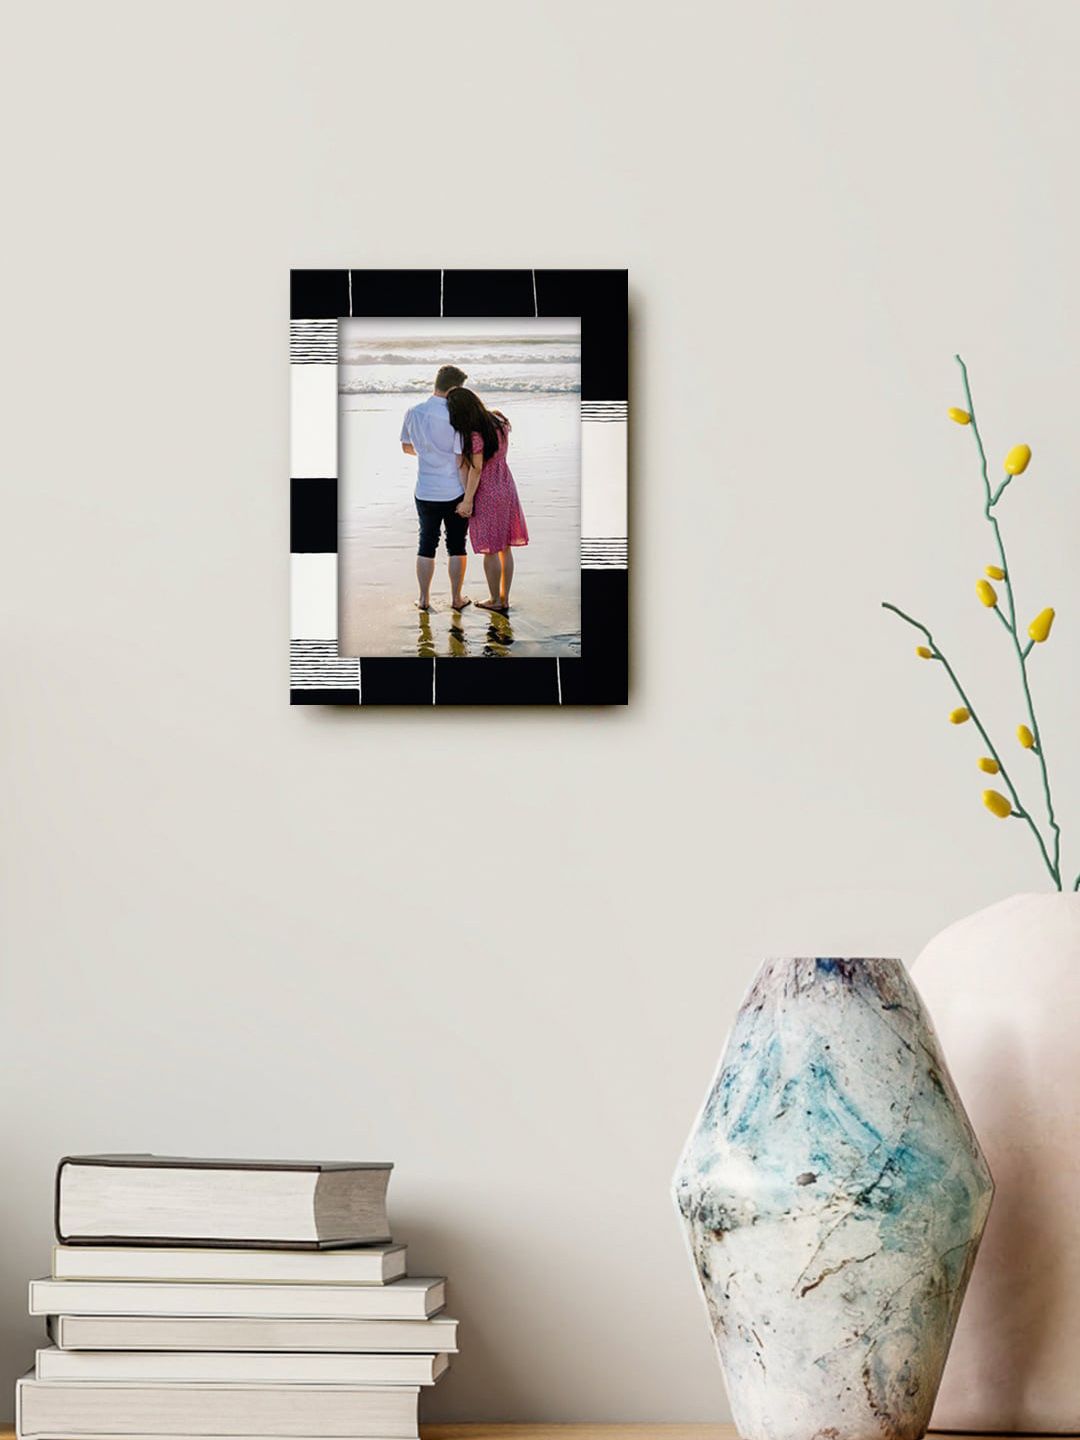 999Store Black & White Printed MDF Wall Photo Frame Price in India